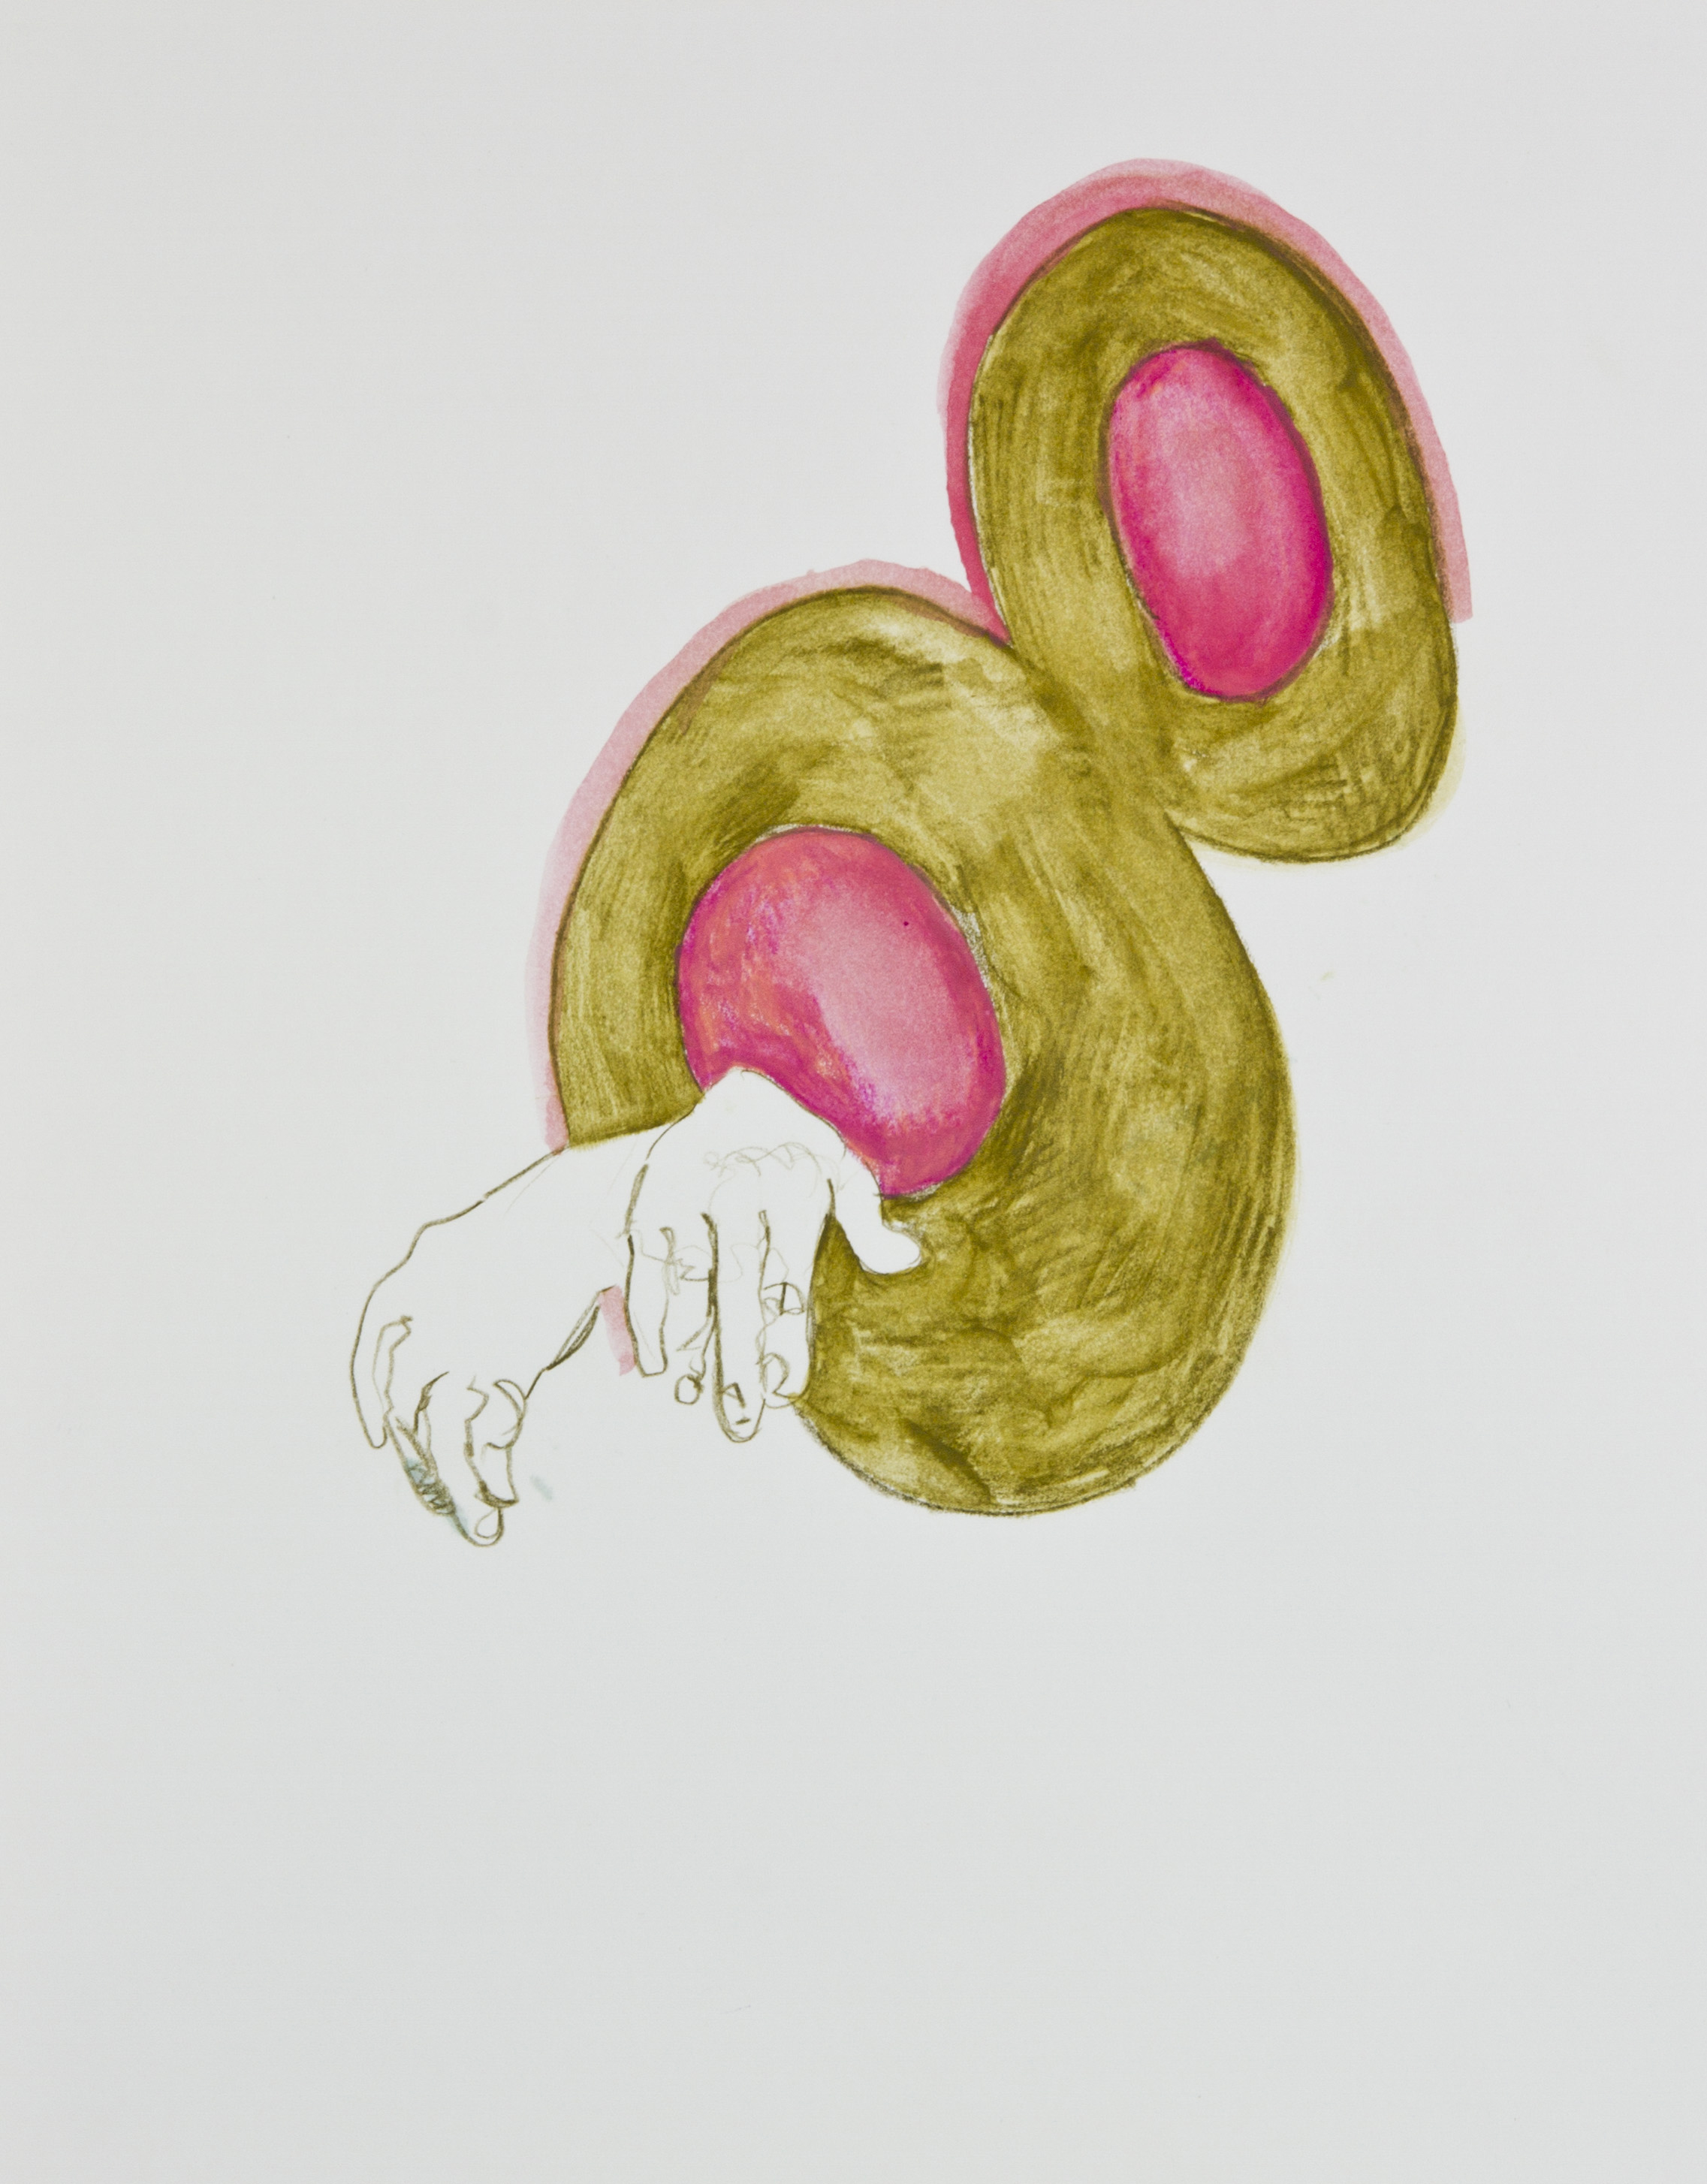 Double O, 2013, graphite, crayon and watercolor pencil on paper, 11x14 inches